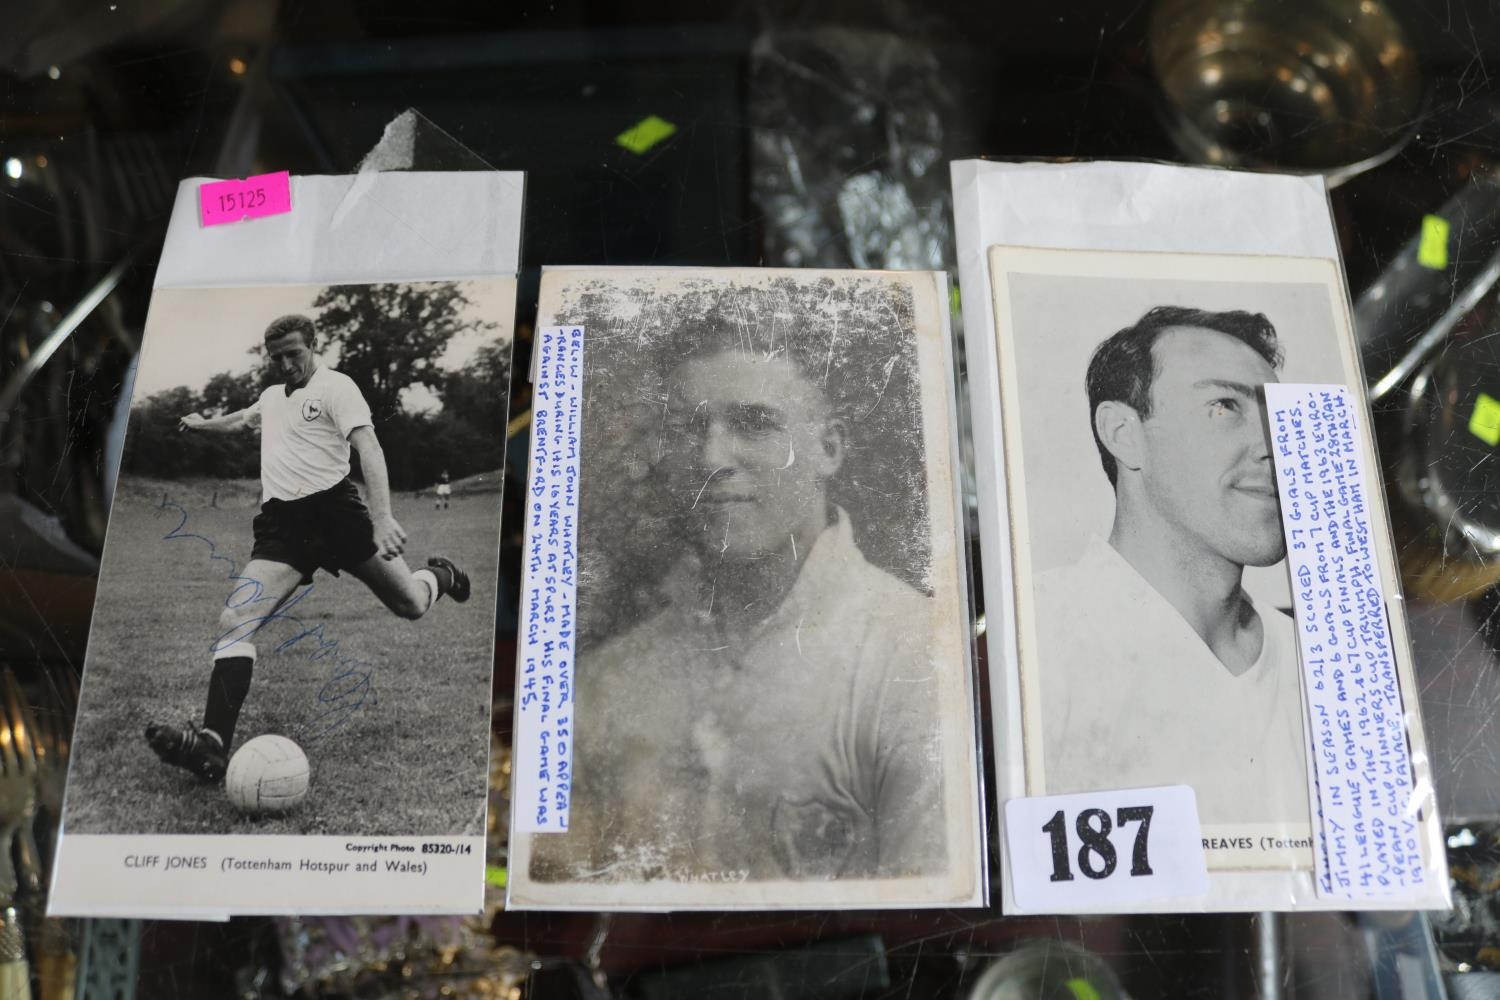 Cliff jones Signed Photo, Jimmy Greaves Sepia & William John Whateley